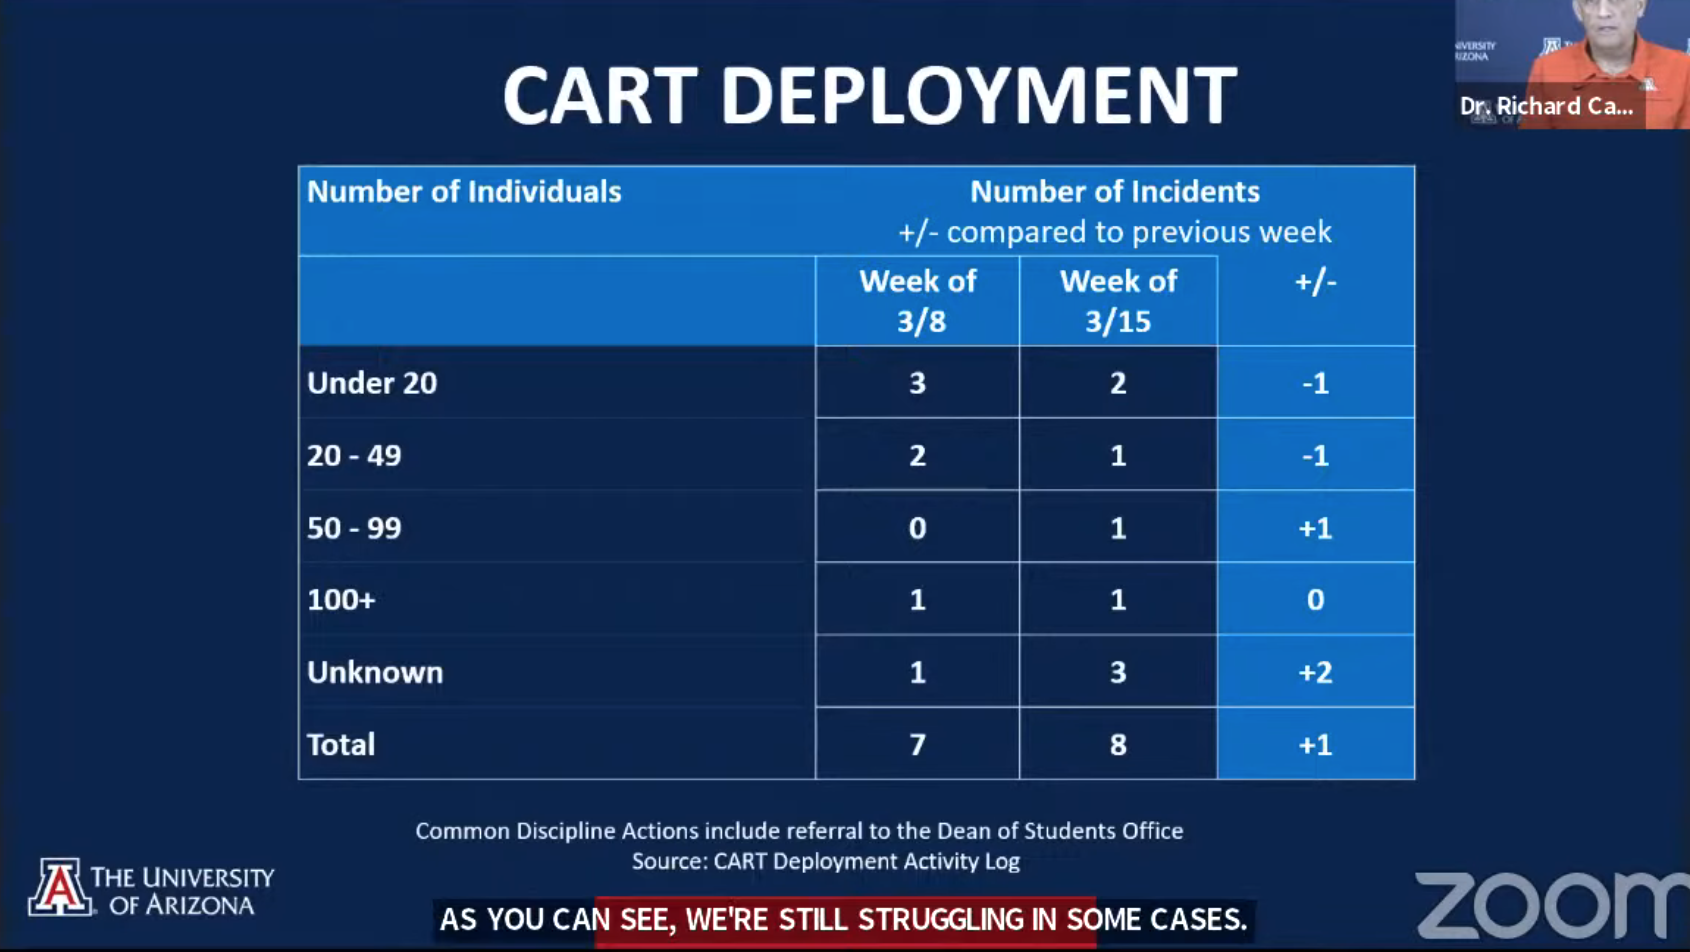 Screenshot of task force Director Dr. Richard Carmona reviewing recent CART deployments, which increased slightly since last week.